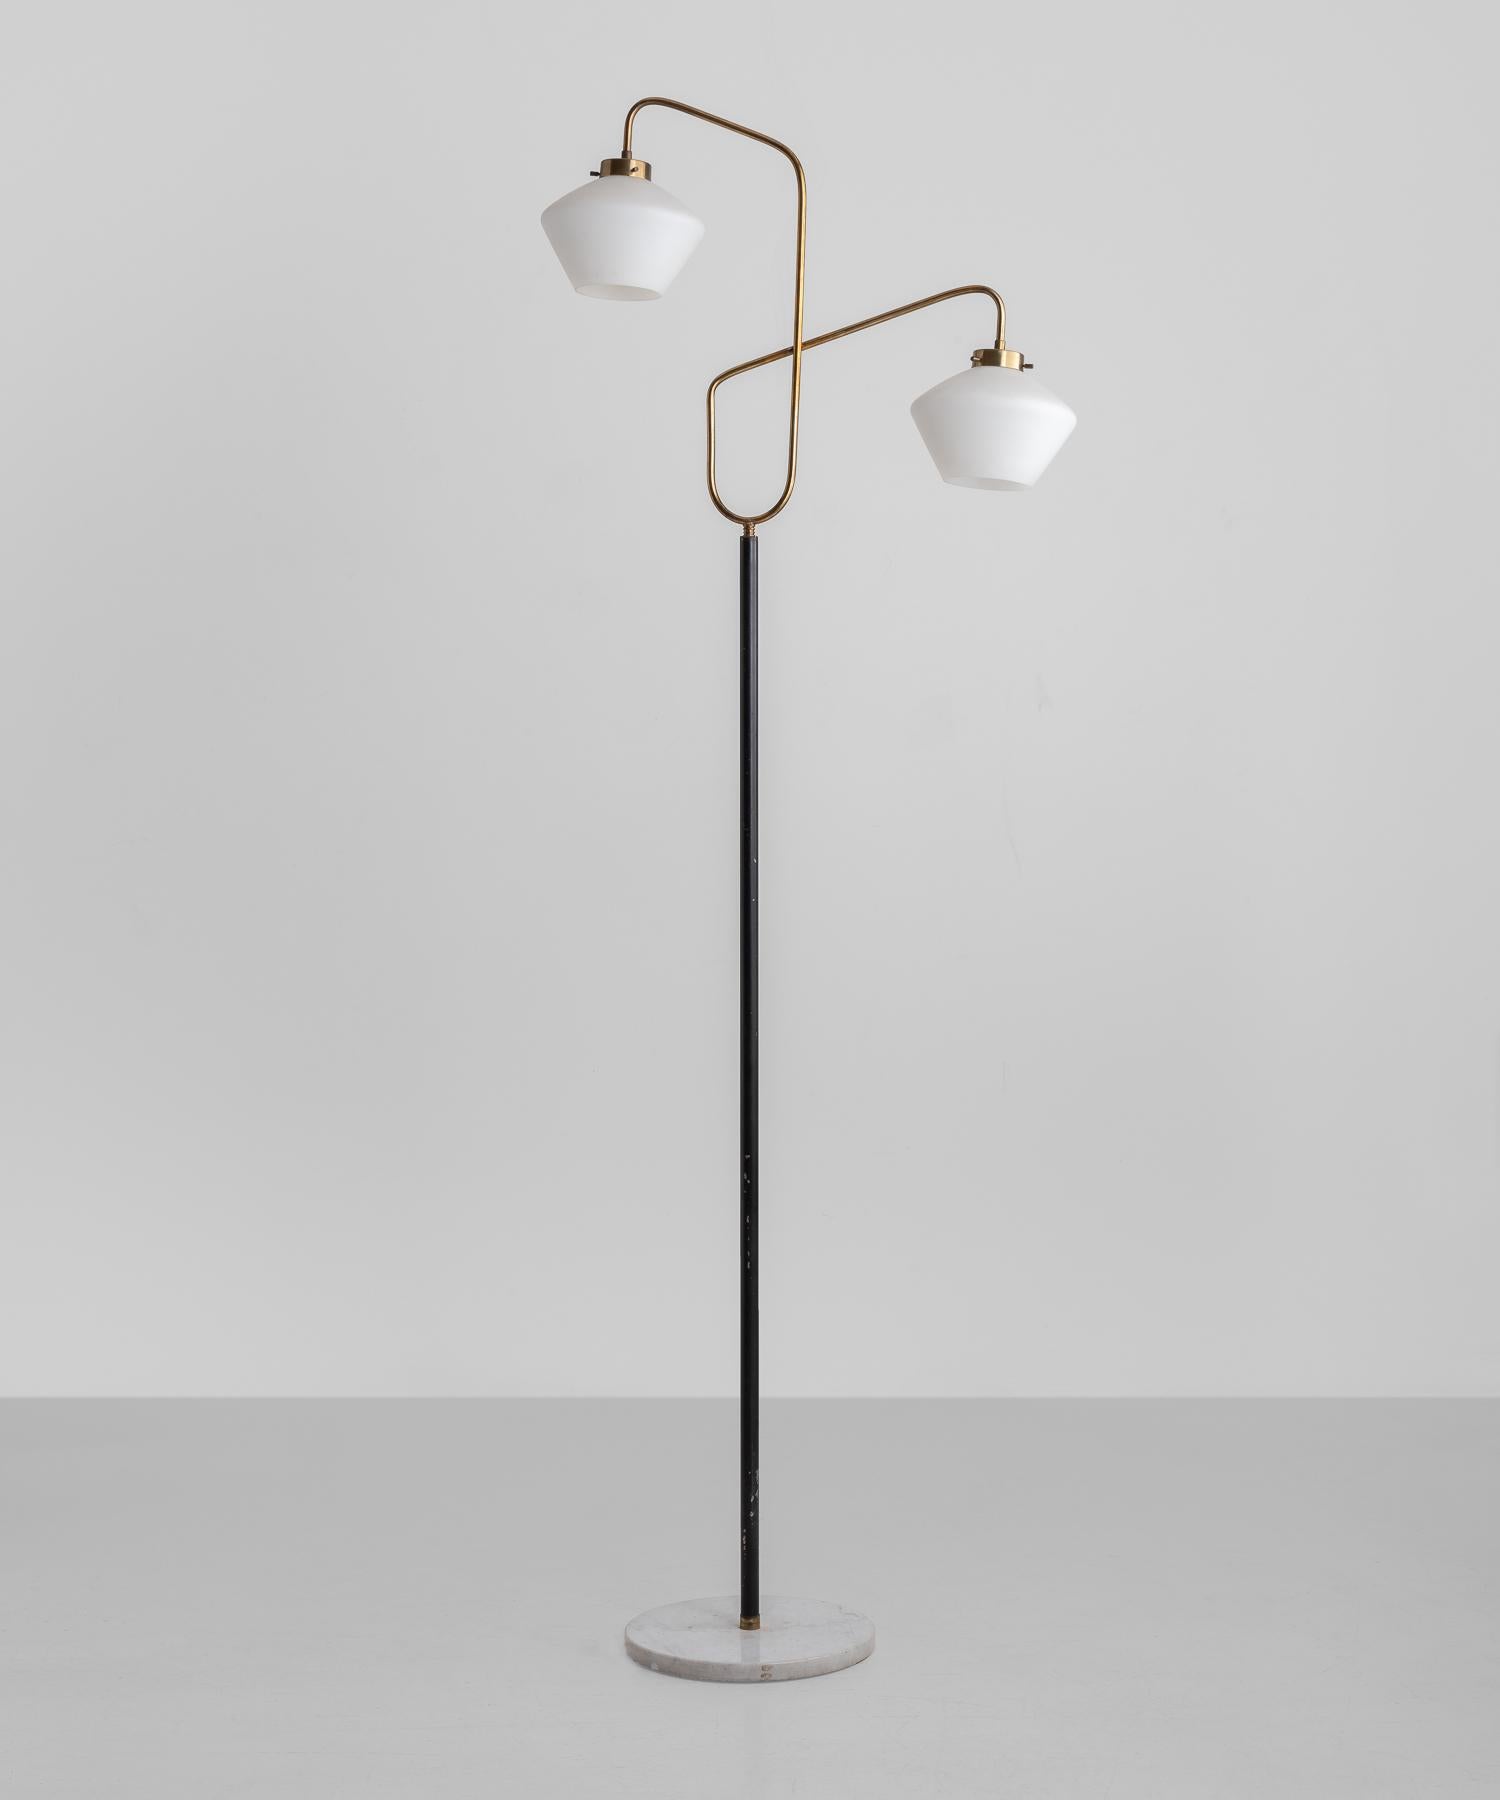 Modern floor lamp by Gilardi & Barzaghi, Italy, circa 1950.

Lacquered brass stand on marble base, with elegant brass arms and opaline glass shades.